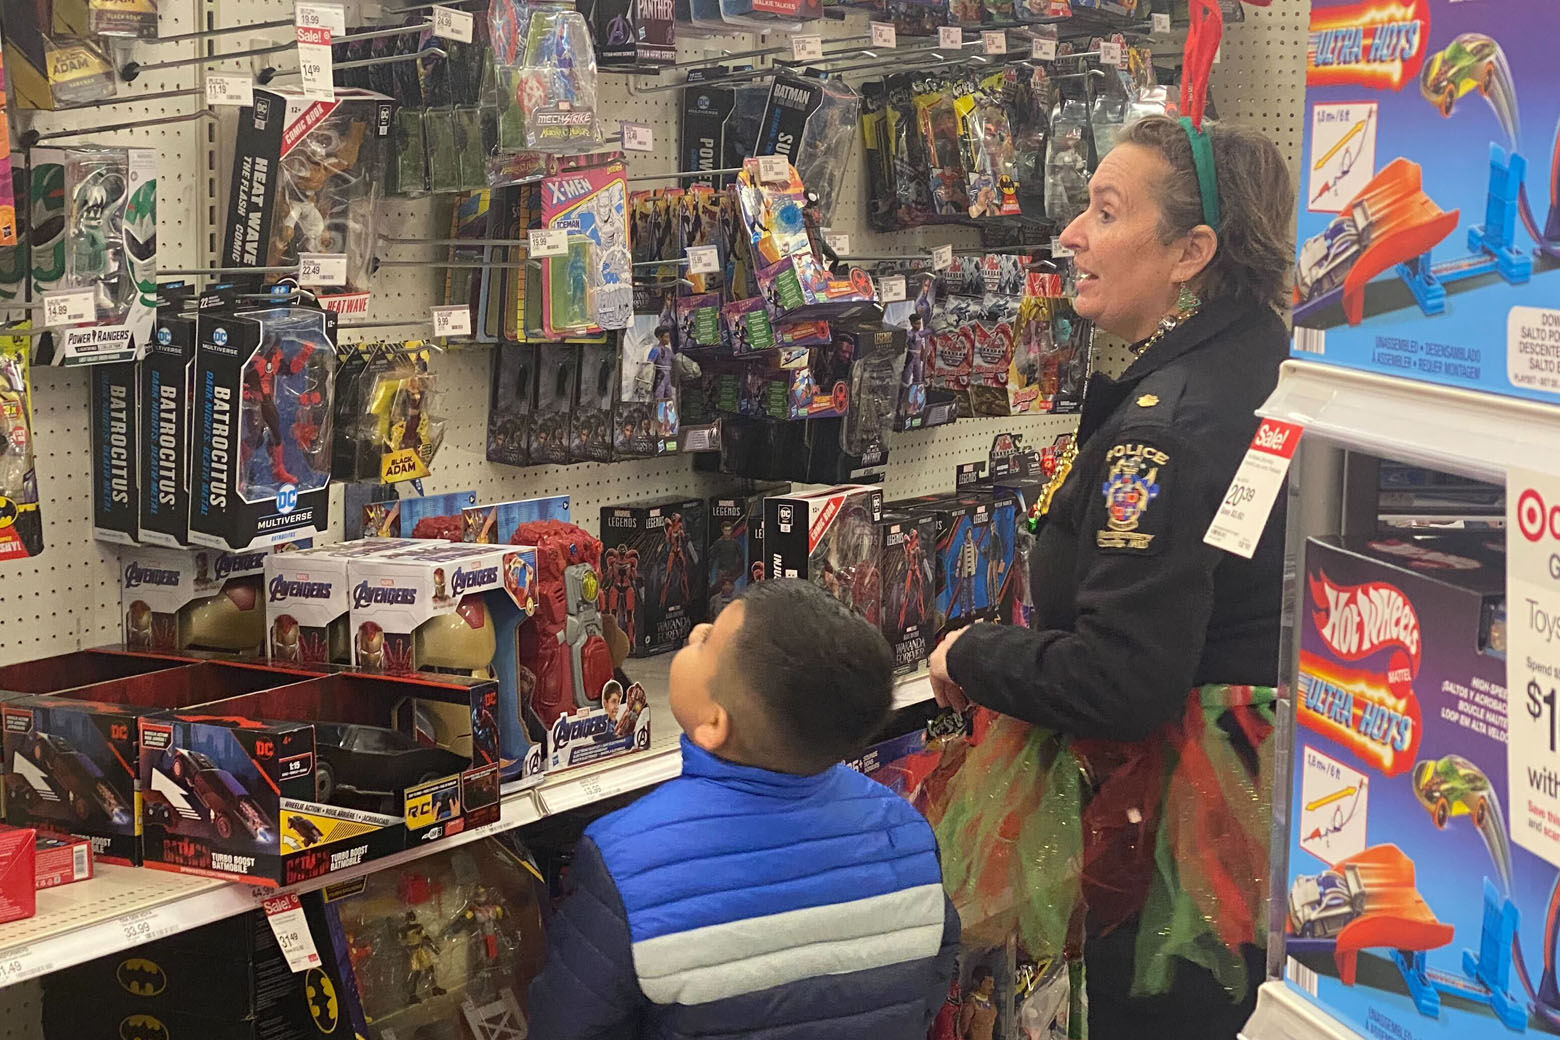 Police go holiday shopping with kids.